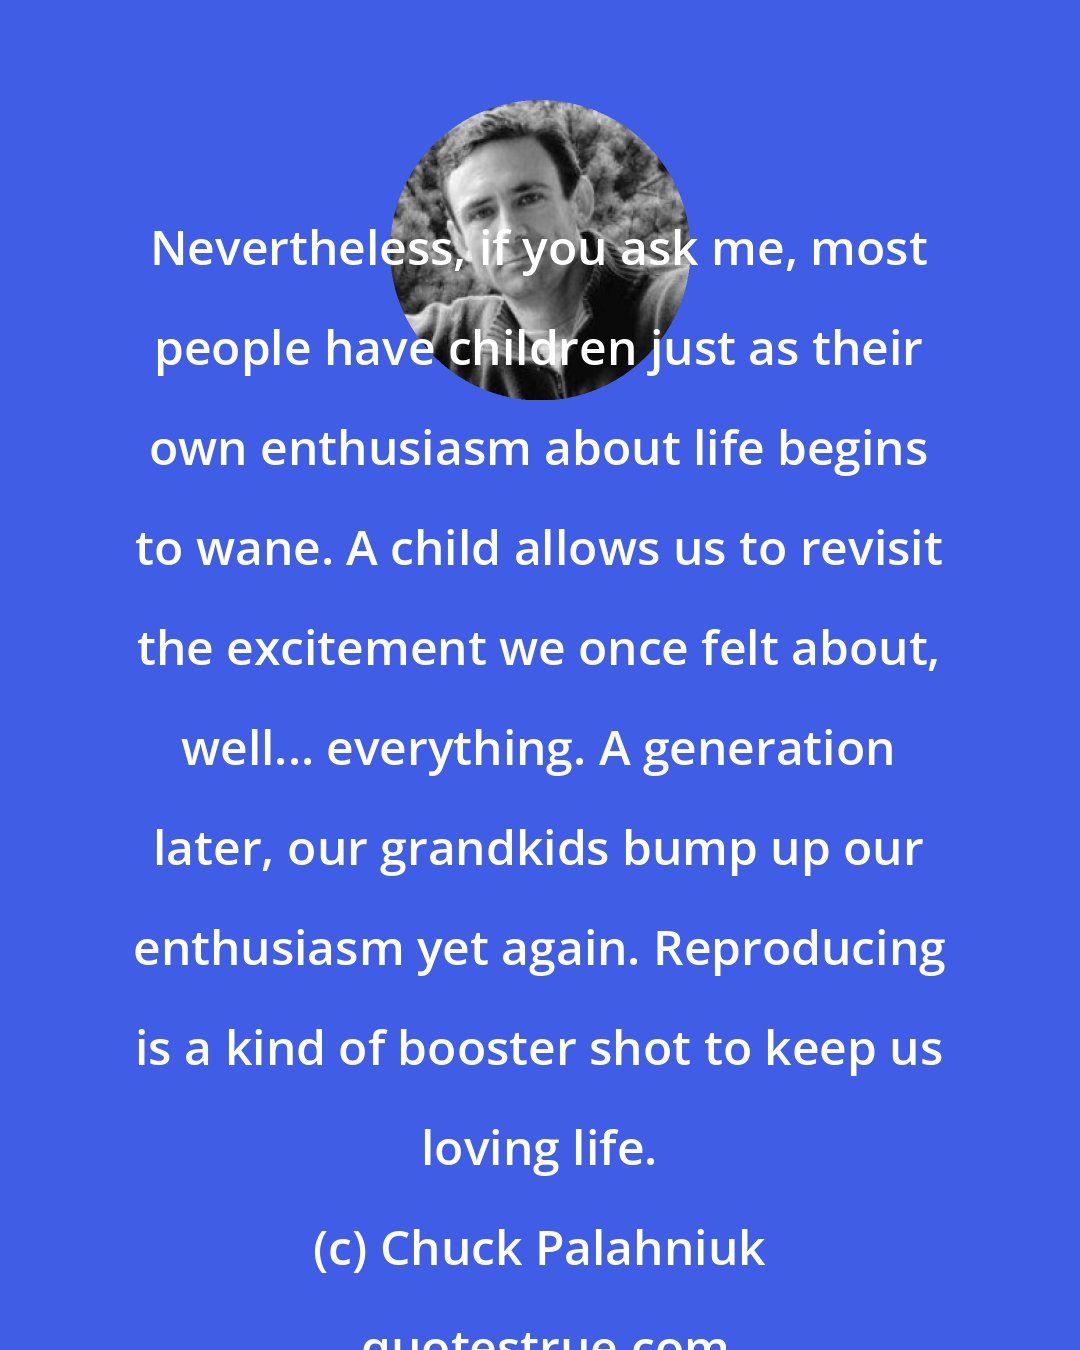 Chuck Palahniuk: Nevertheless, if you ask me, most people have children just as their own enthusiasm about life begins to wane. A child allows us to revisit the excitement we once felt about, well... everything. A generation later, our grandkids bump up our enthusiasm yet again. Reproducing is a kind of booster shot to keep us loving life.